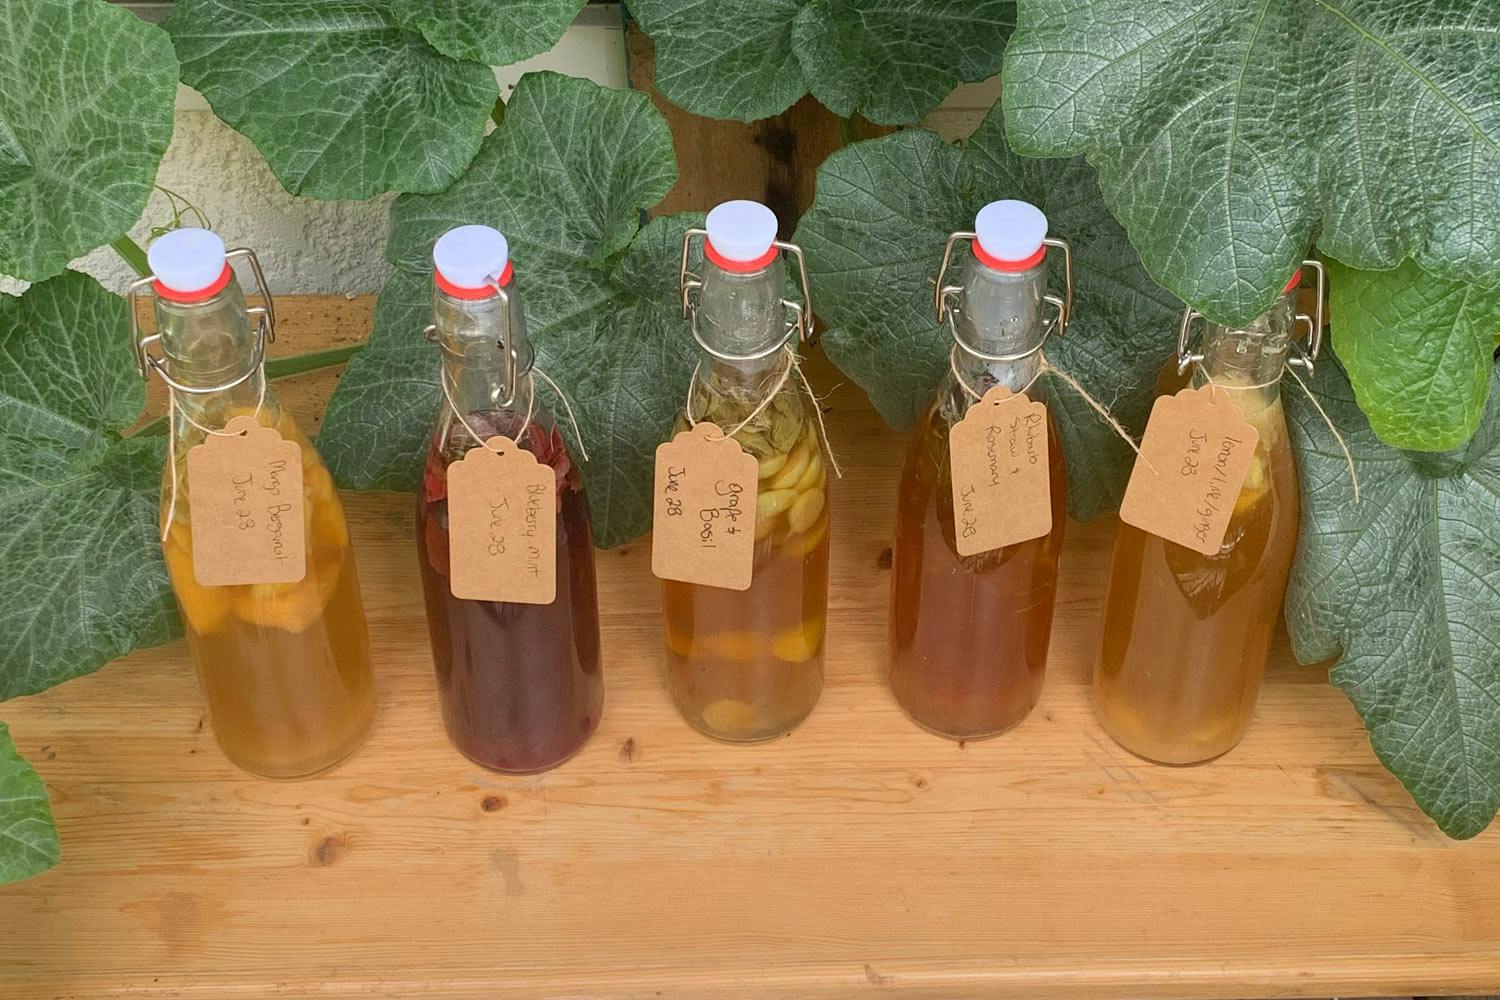 Five clear glass bottles of golden kombucha with paper labels, sitting on a wooden surface surrounded by big green leaves.